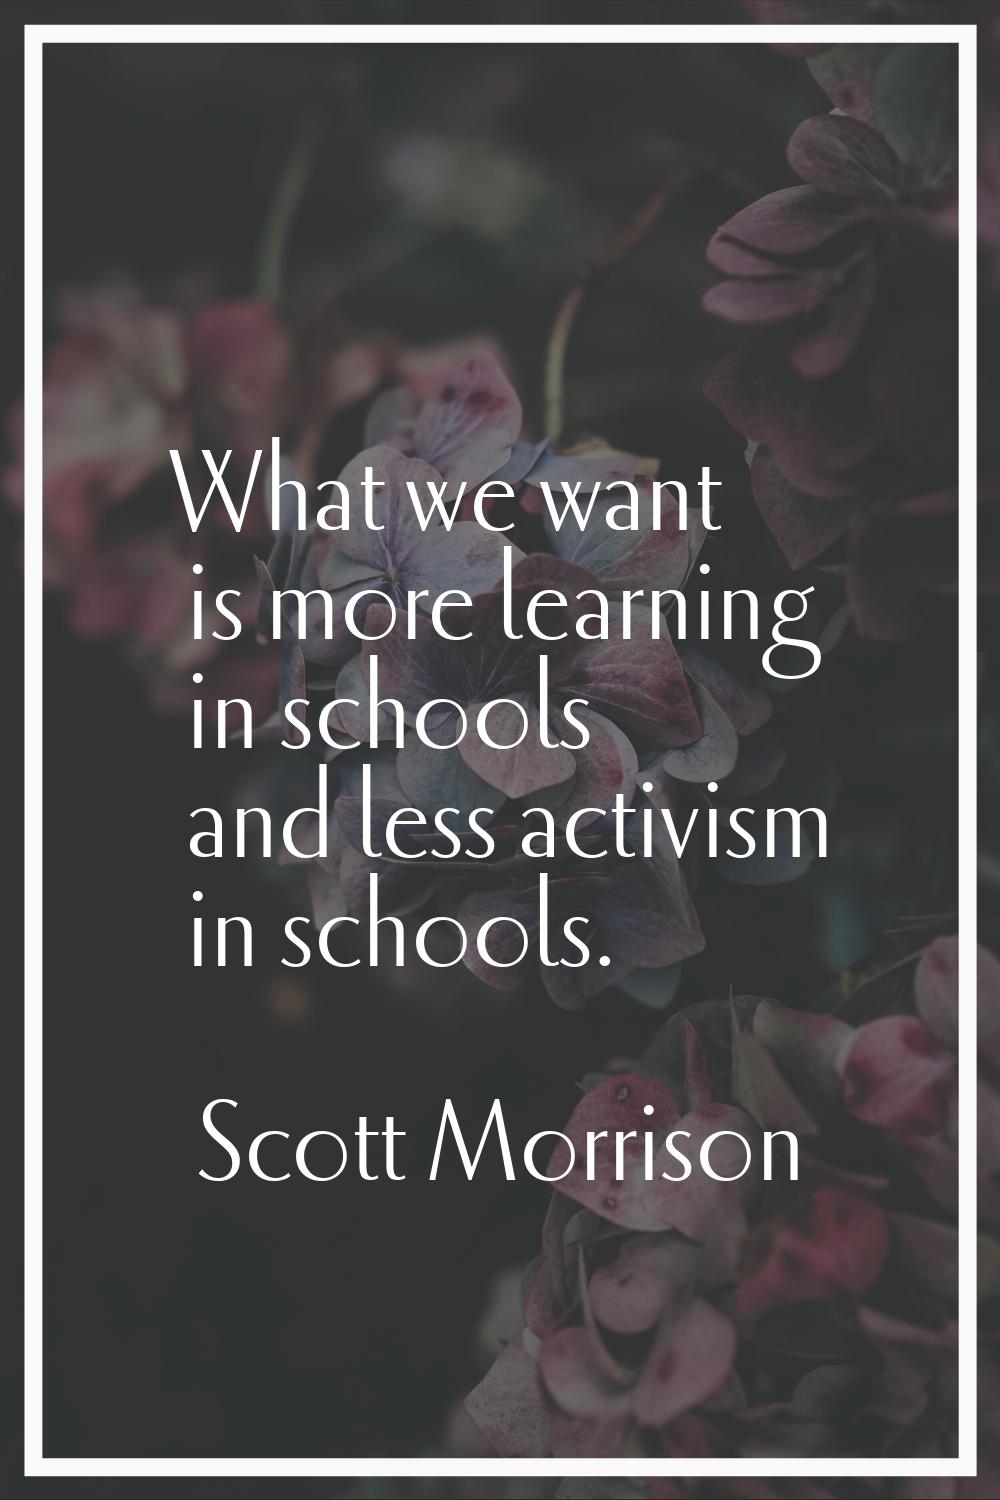 What we want is more learning in schools and less activism in schools.